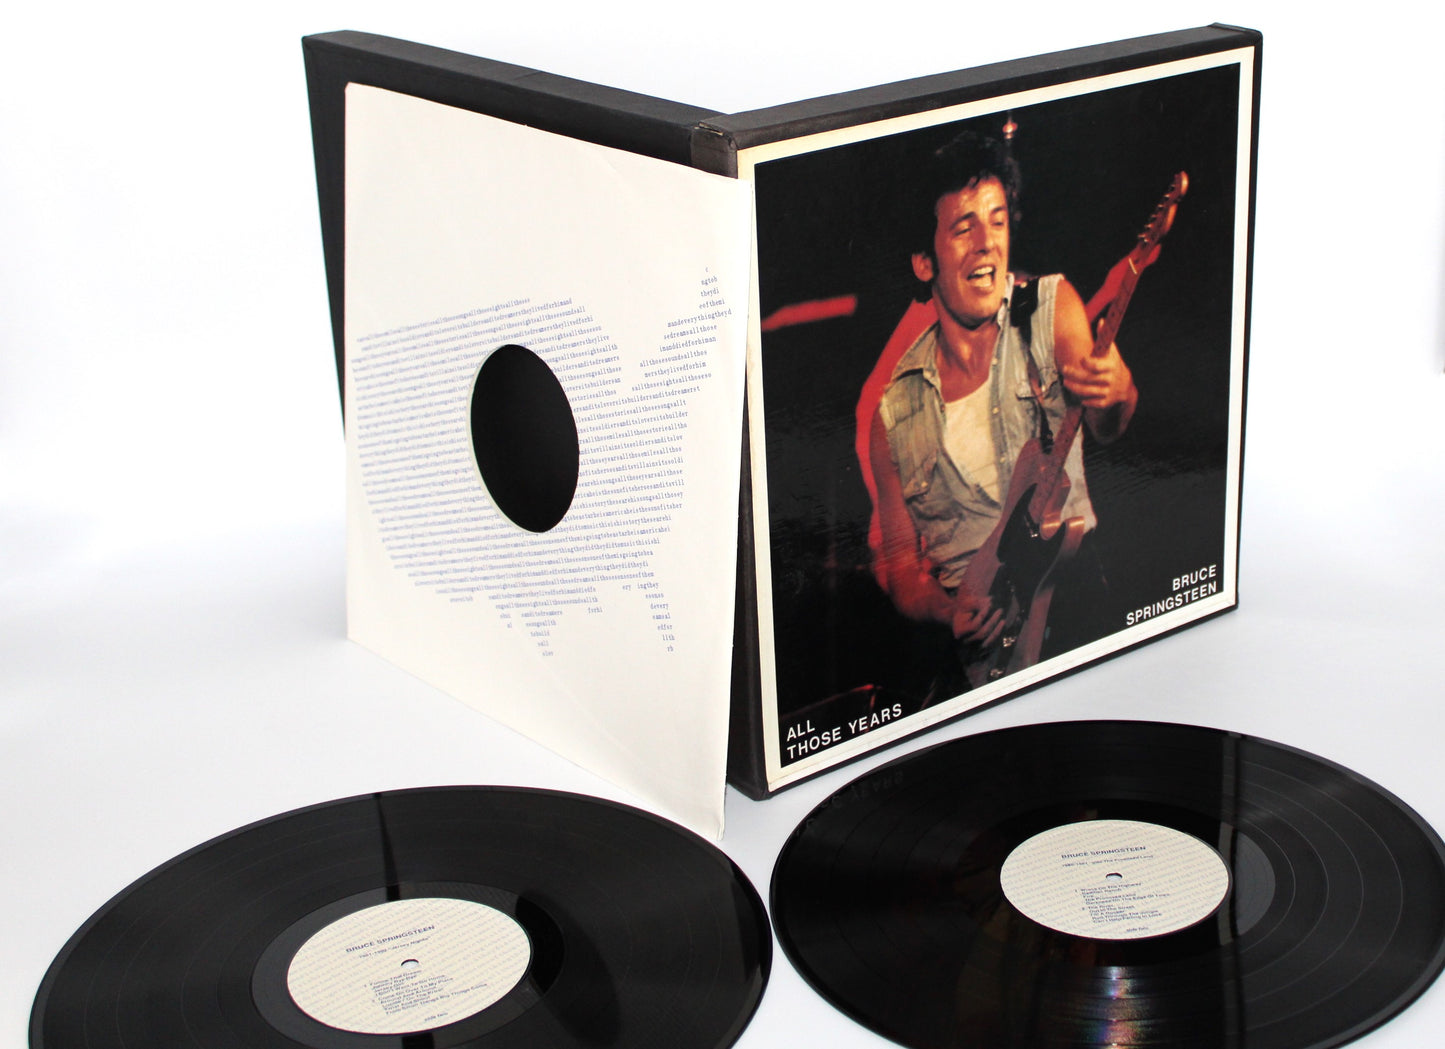 BRUCE SPRINGSTEEN - ALL THOSE YEARS - 10 LP BOX SET UNOFFICIAL - NEAR MINT